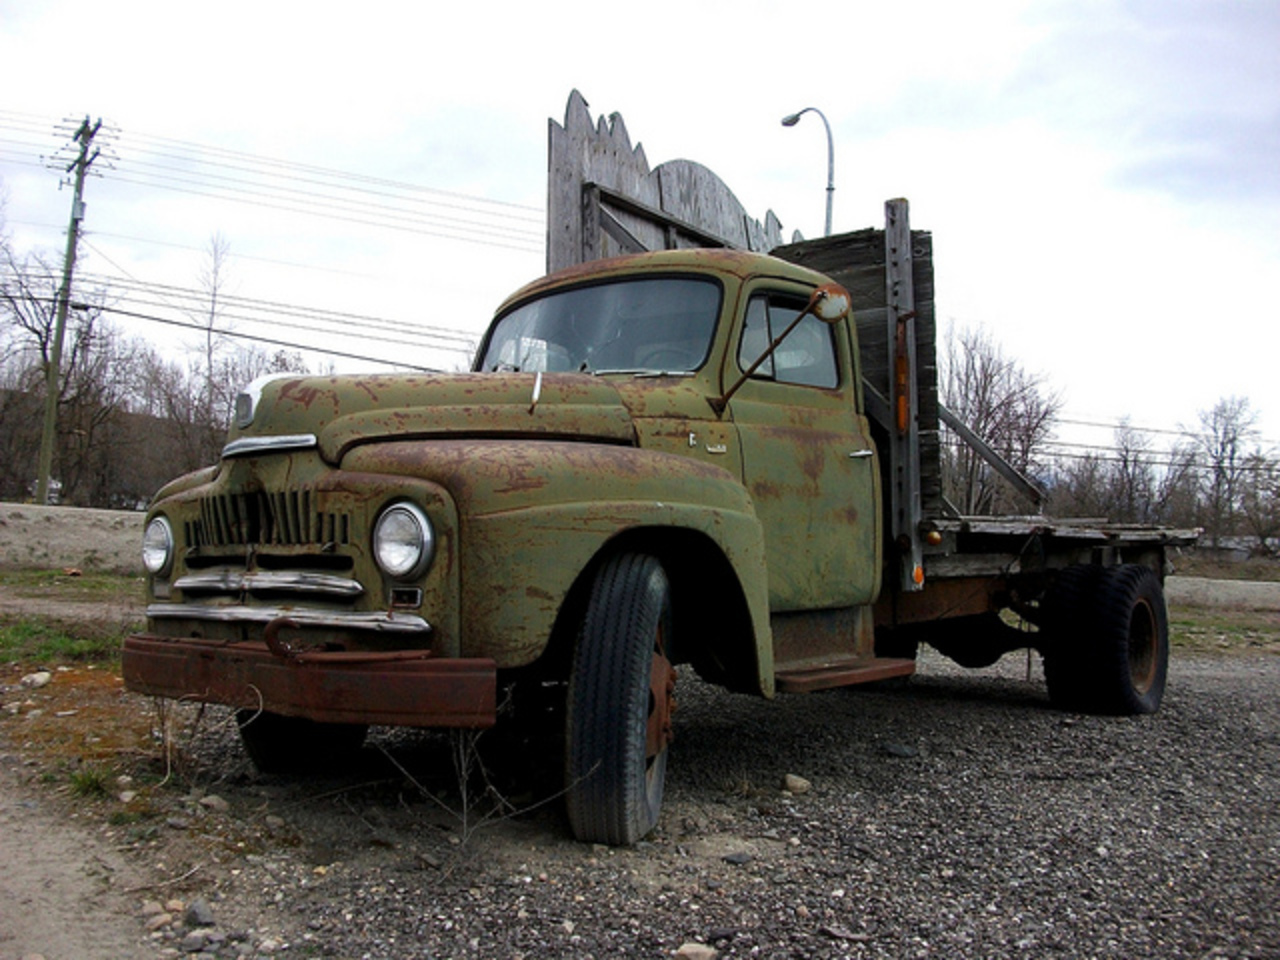 Flickr: The Rusty Old Cars Pool